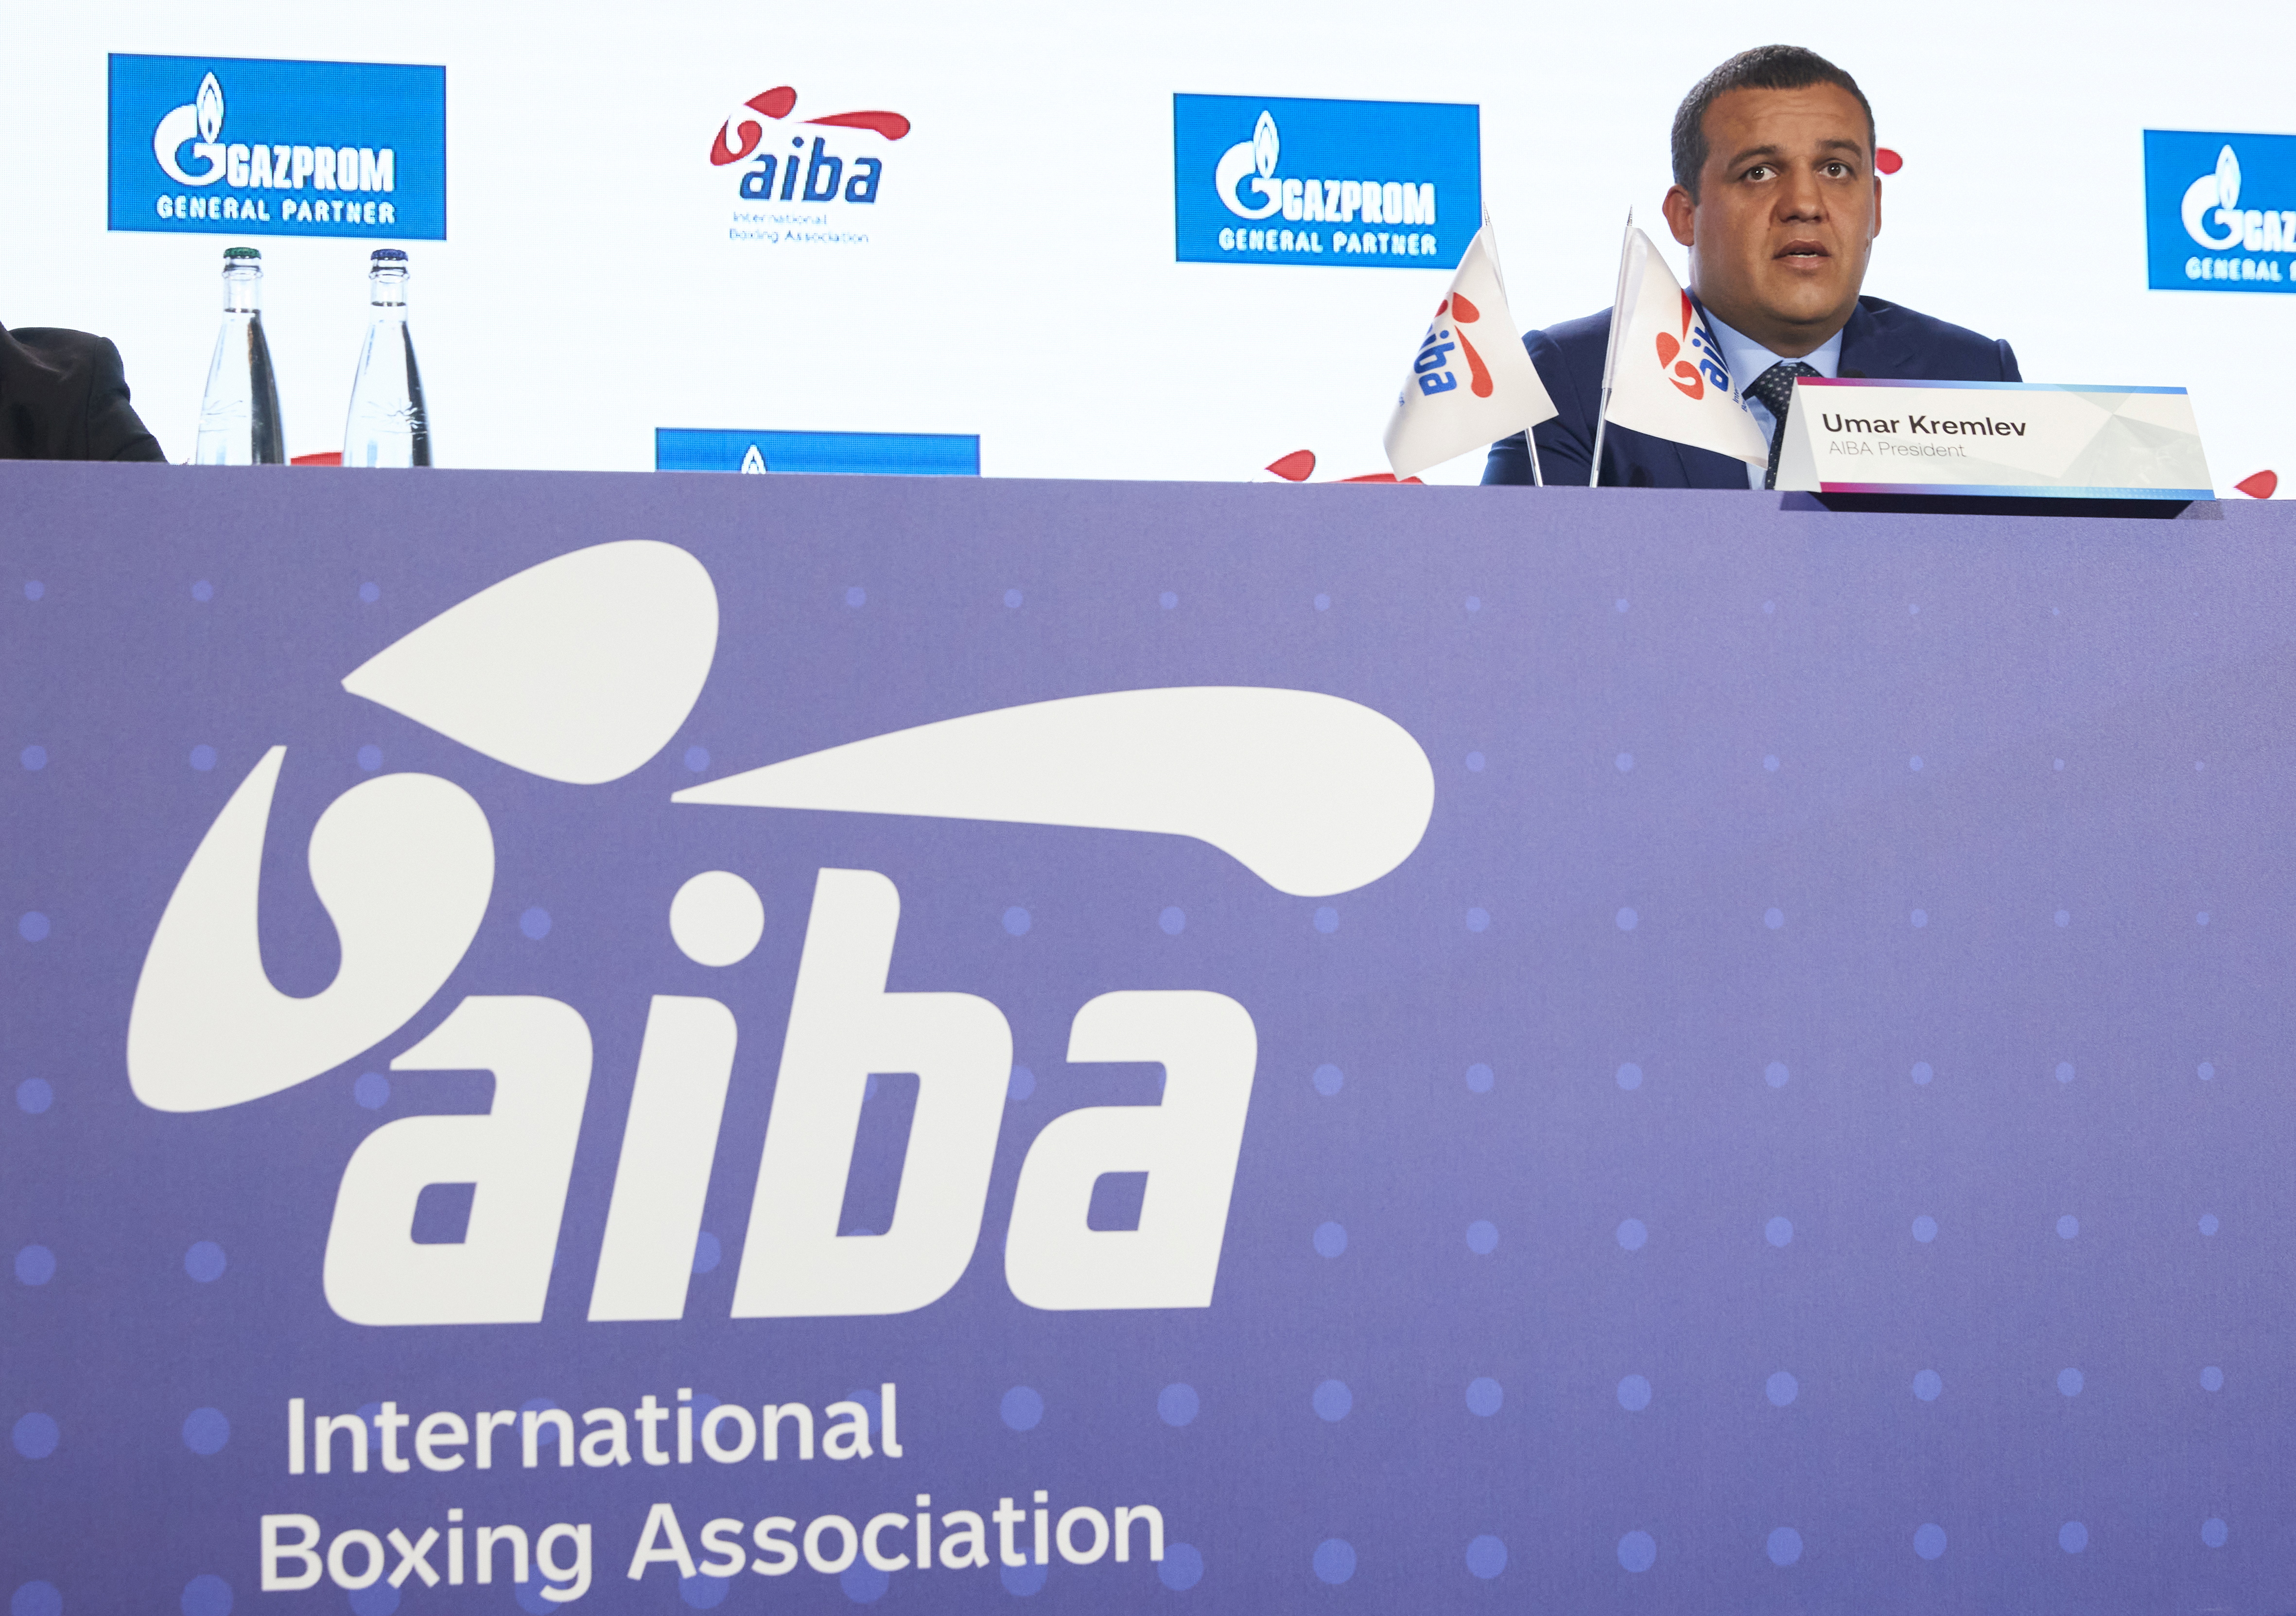 International Boxing Association (AIBA) President Umar Kremlev attends a news conference ahead of the Tokyo 2020 Olympic Games in Lausanne, Switzerland June 28, 2021.  REUTERS/Denis Balibouse